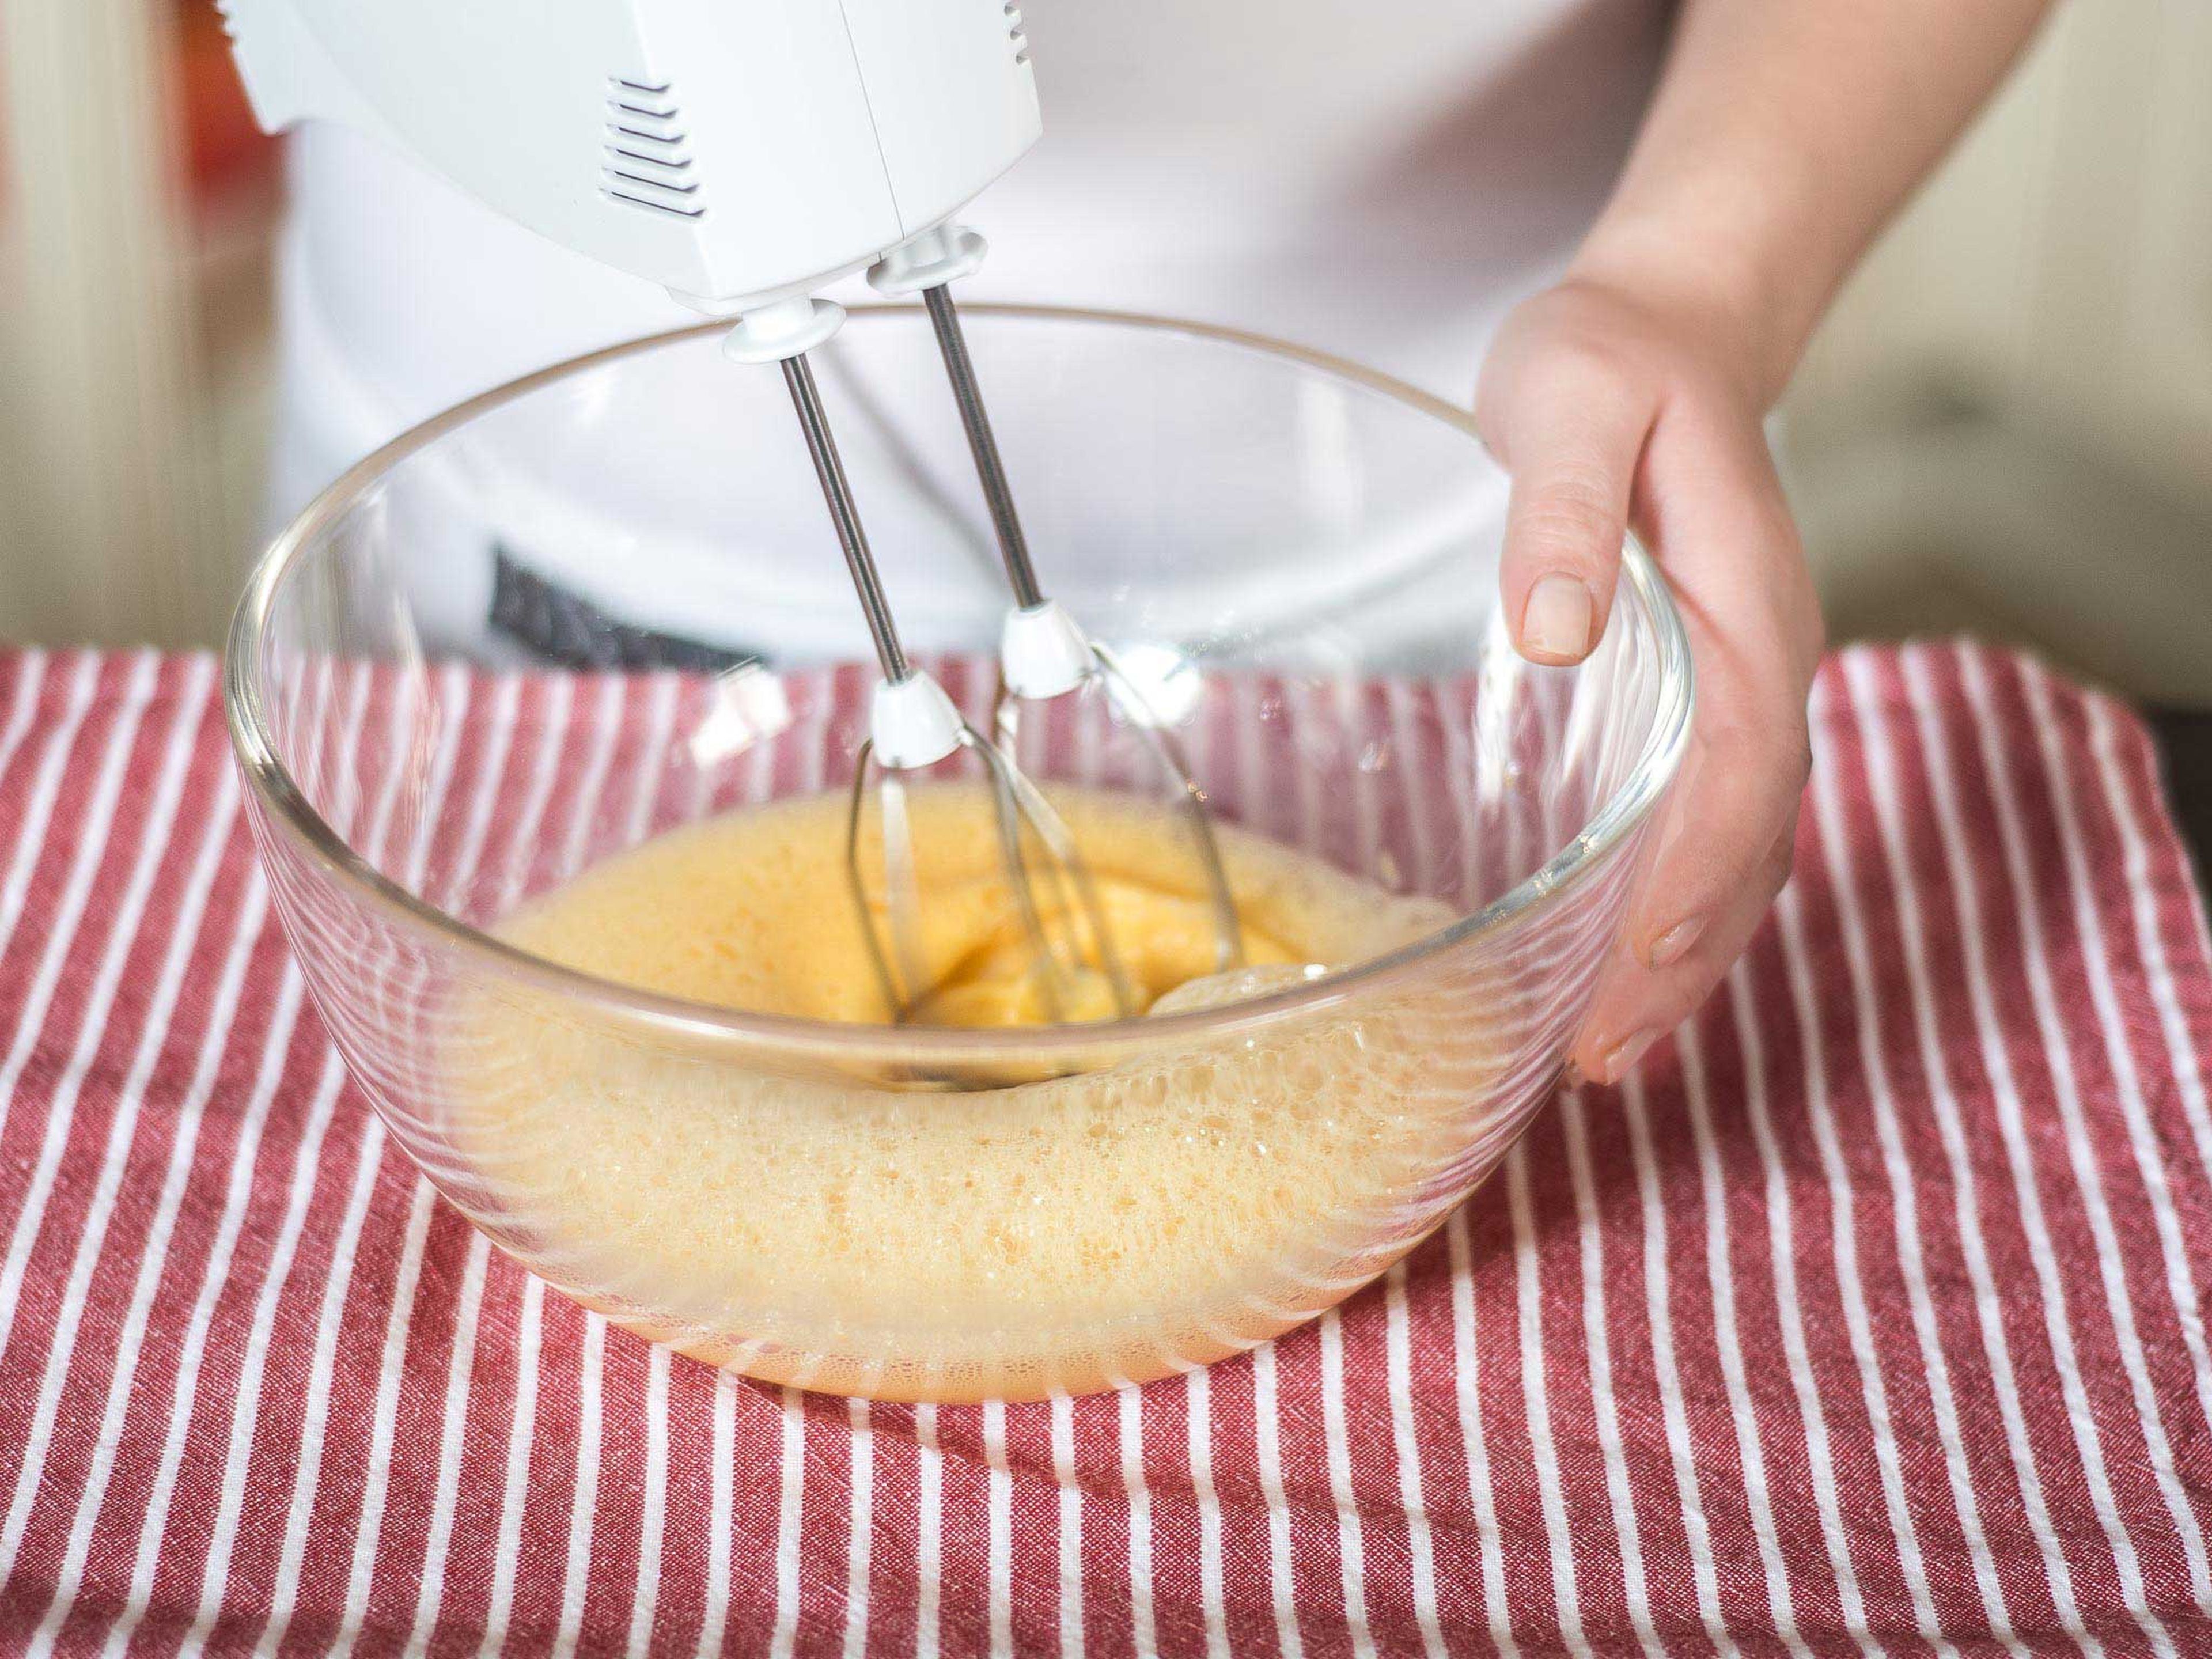 Beat eggs and egg yolks with hand mixer until fluffy.